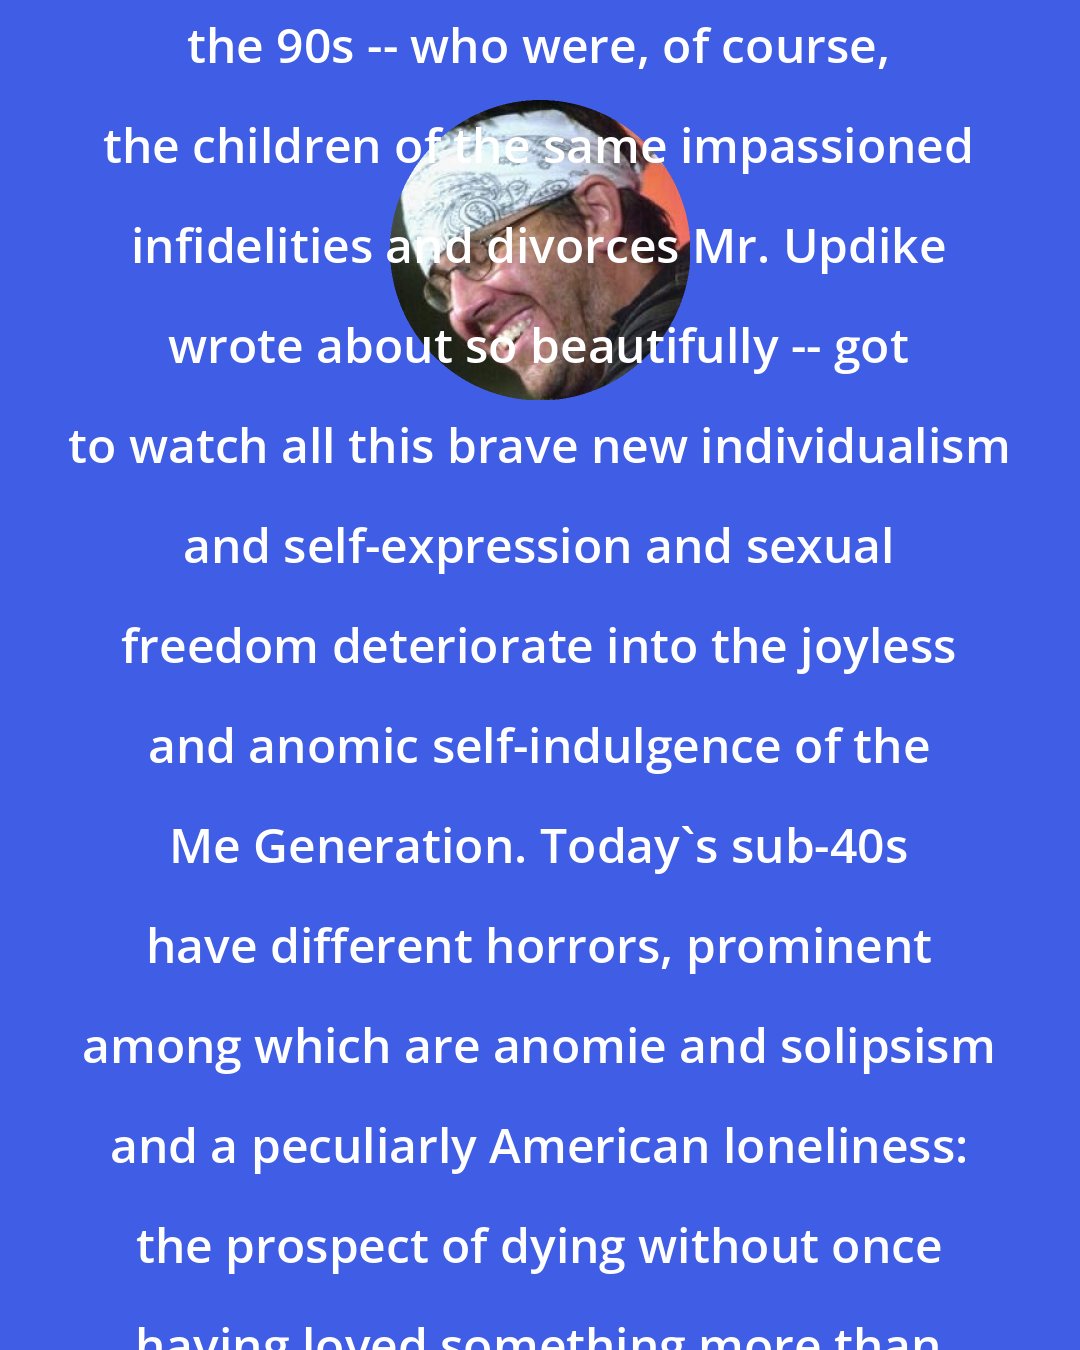 David Foster Wallace: But the young educated adults of the 90s -- who were, of course, the children of the same impassioned infidelities and divorces Mr. Updike wrote about so beautifully -- got to watch all this brave new individualism and self-expression and sexual freedom deteriorate into the joyless and anomic self-indulgence of the Me Generation. Today's sub-40s have different horrors, prominent among which are anomie and solipsism and a peculiarly American loneliness: the prospect of dying without once having loved something more than yourself.